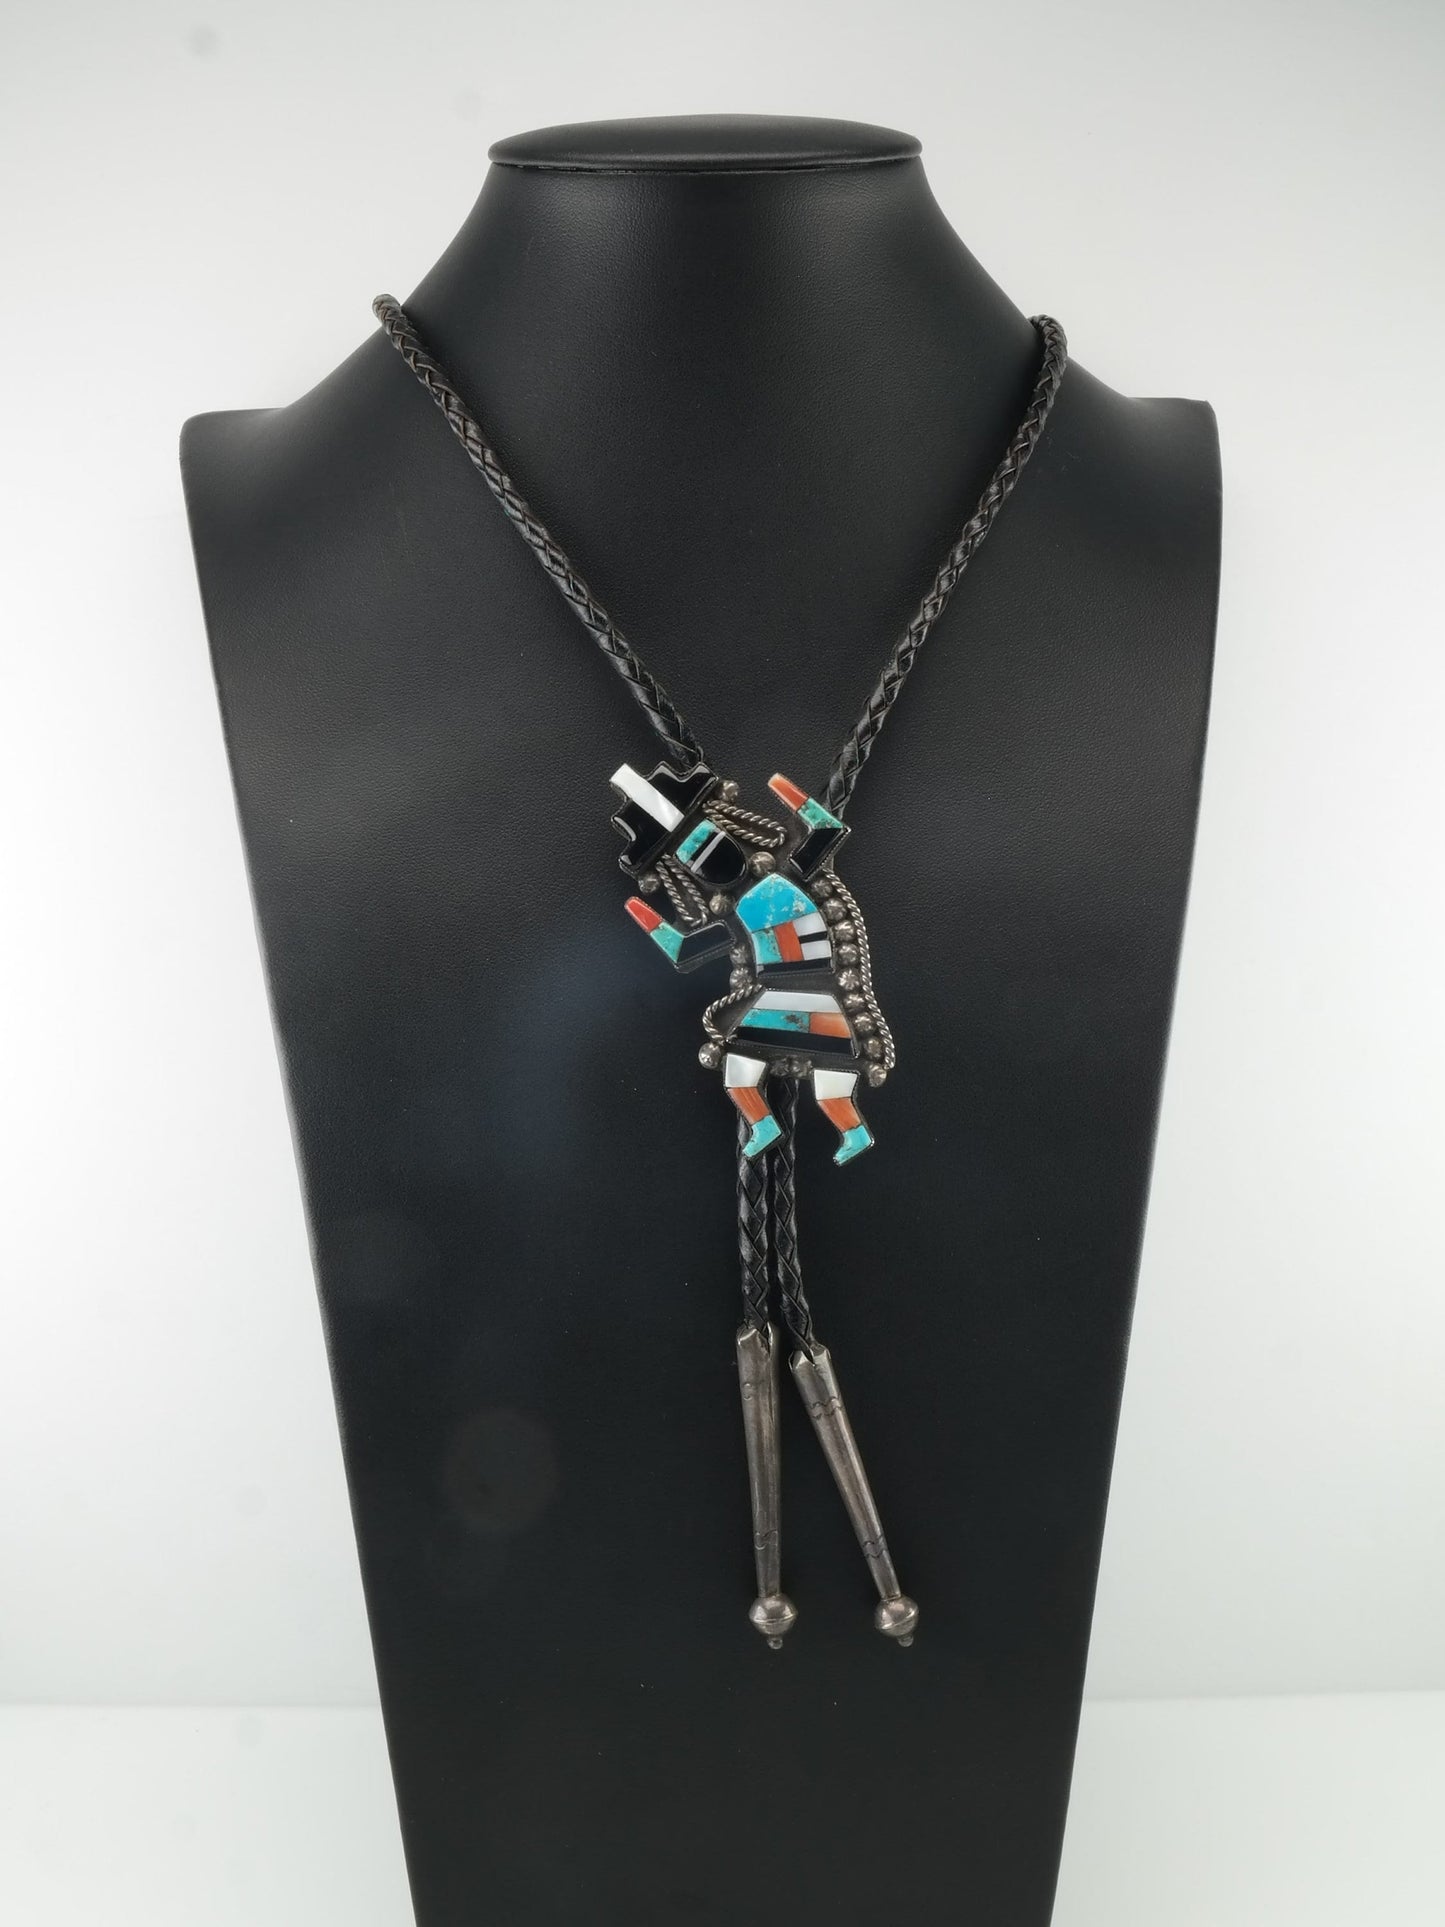 Zuni Turquoise Inlay Rain Dancer Bolo Tie Necklace Sterling Silver